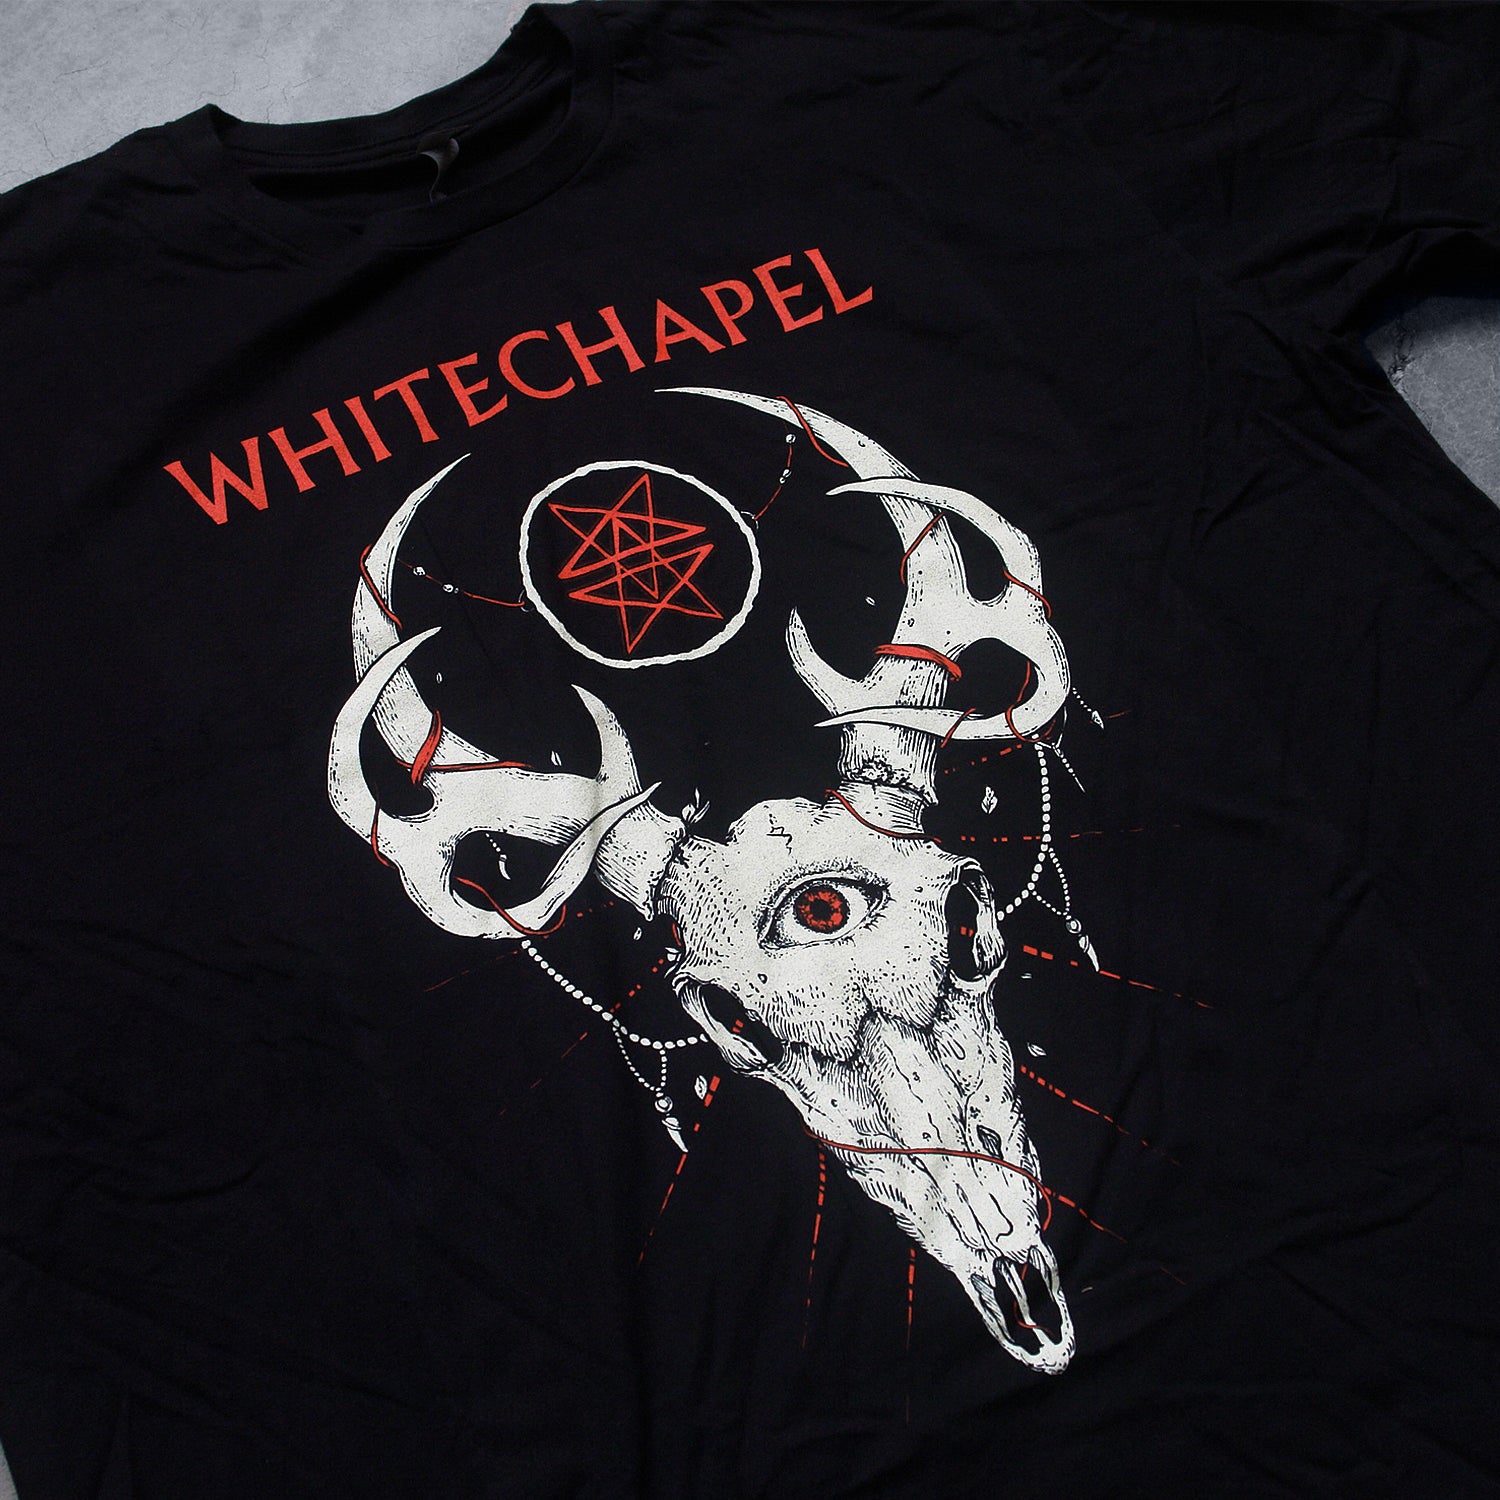 close up Image of a black tshirt against a grey concrete background. Across the center of the shirt in red text reads "whitechapel". Below this is a graphic of a deer skull with antlers. The deer has a third eye in the center of its head. The eye is red. The center of the antlers has a white outlined circle with no fill. inside the circle are two red stars mirroring each other. 